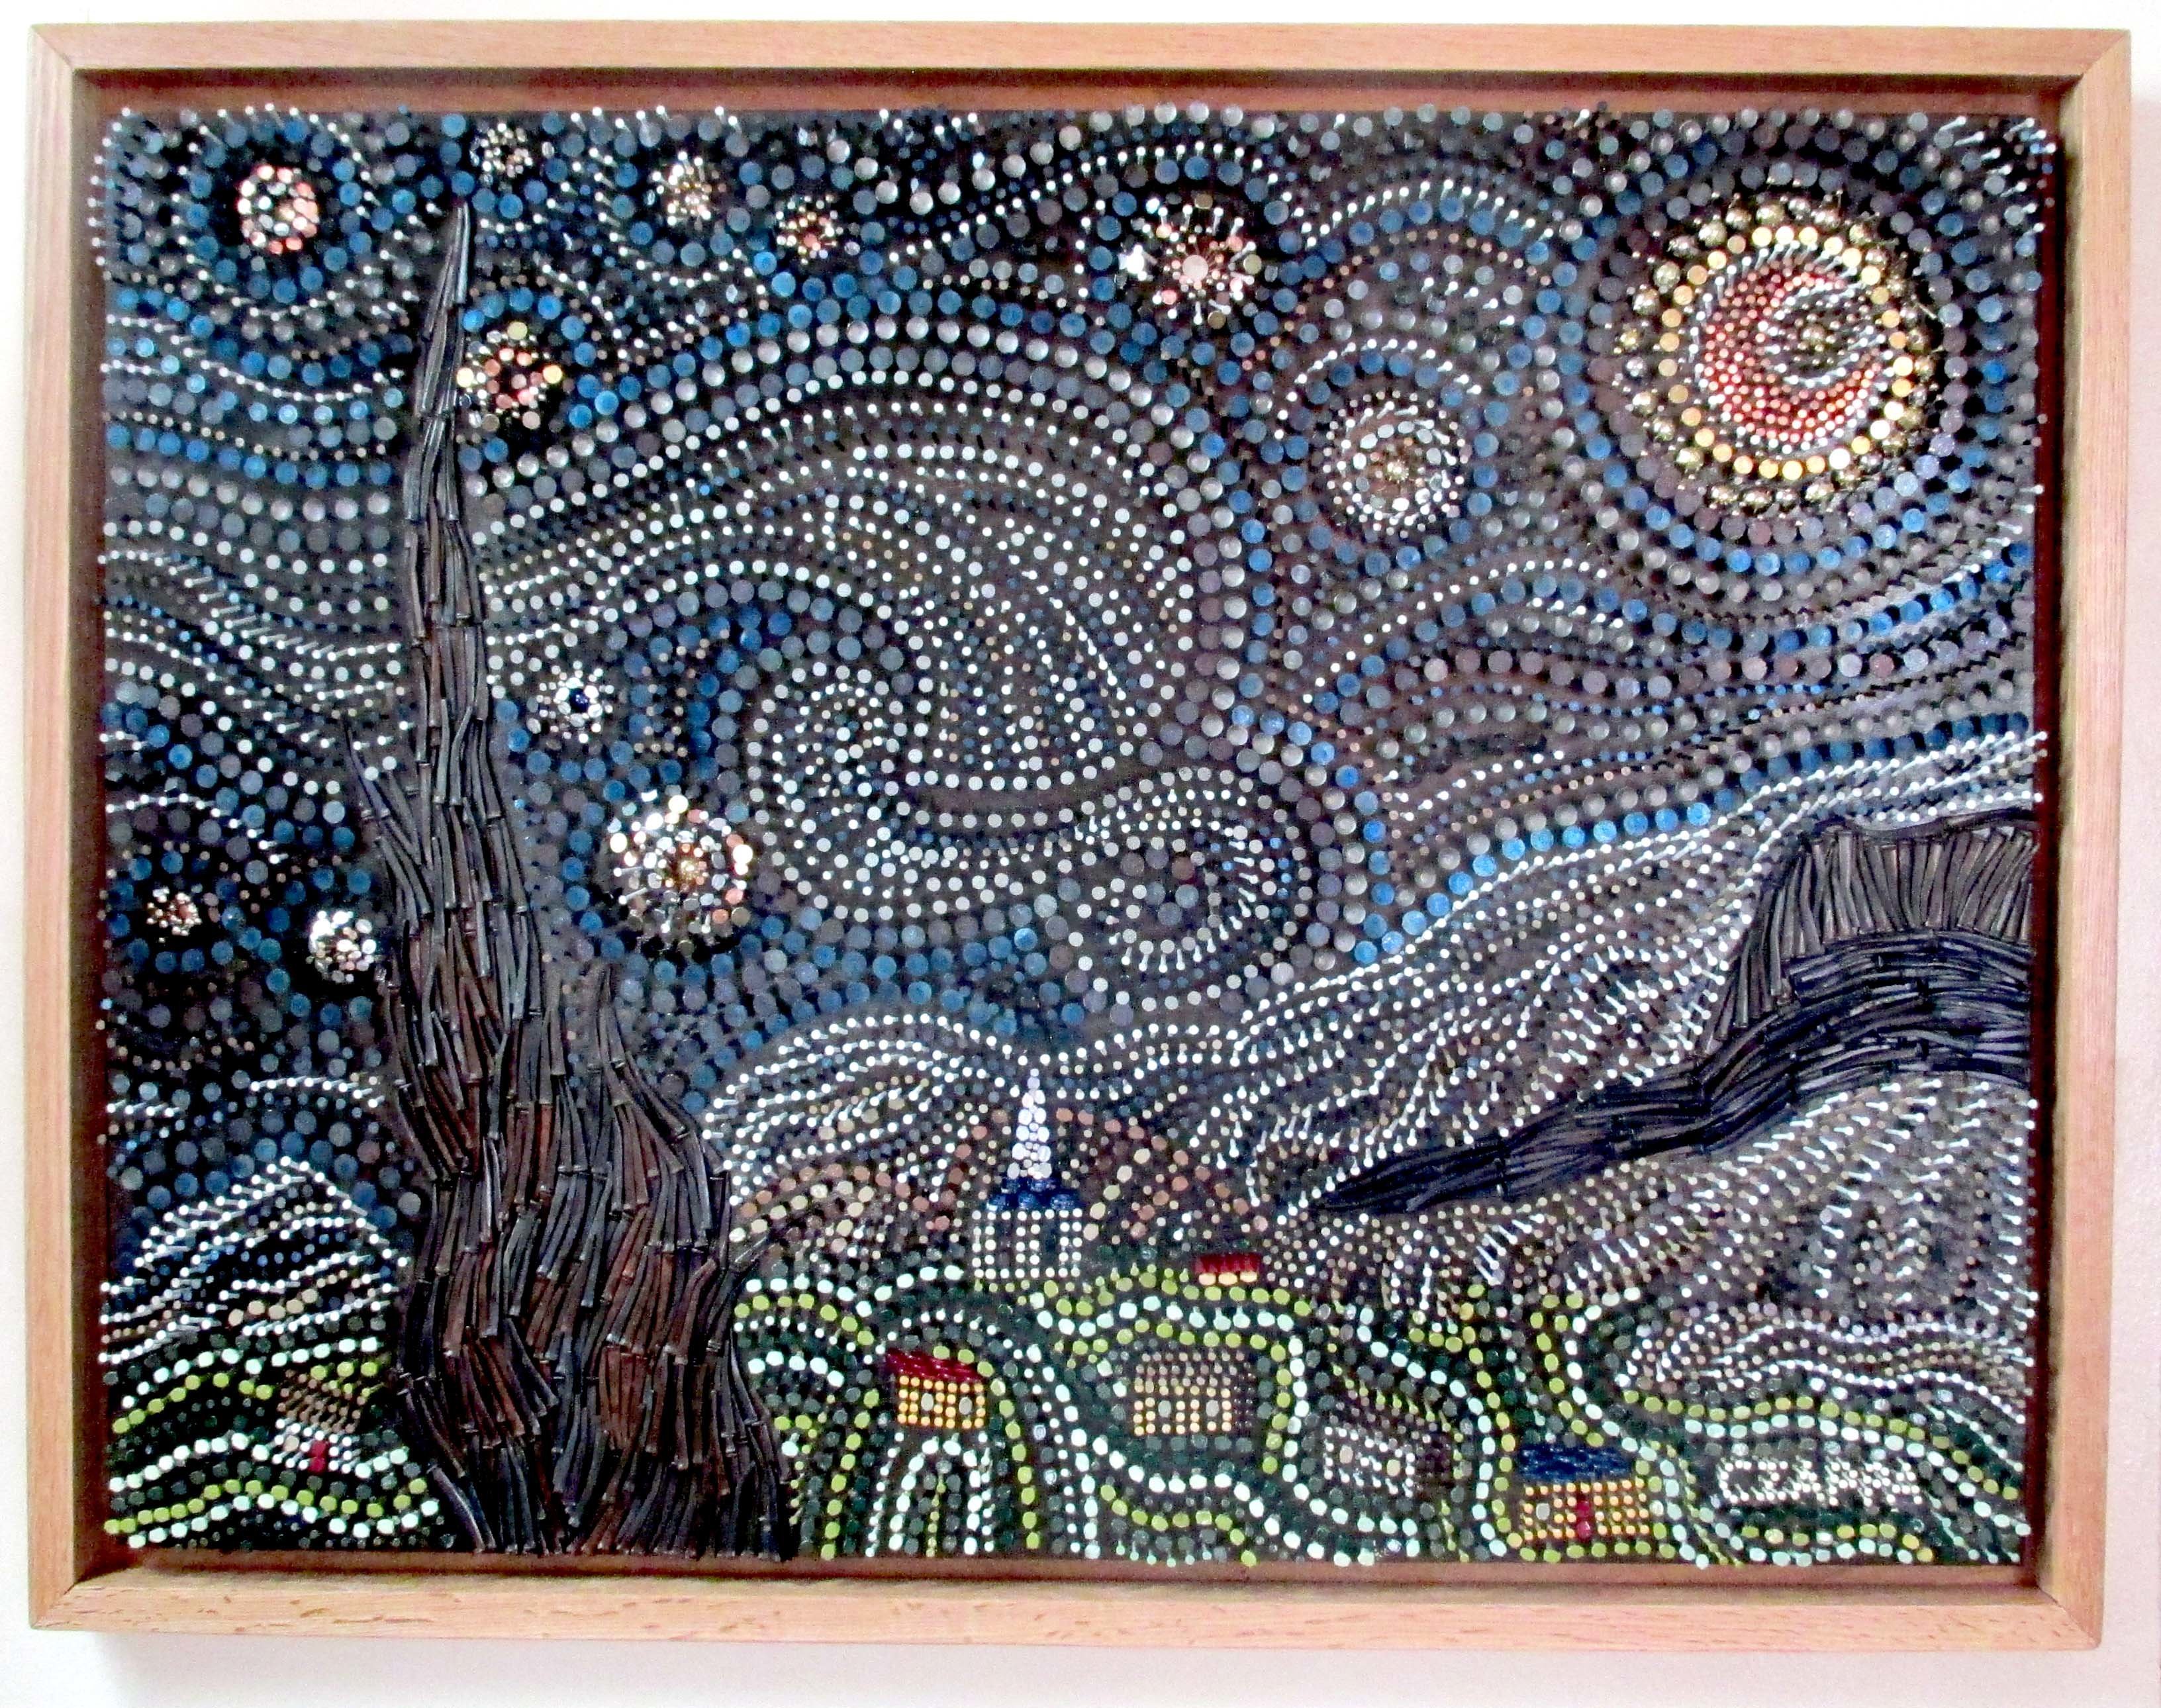 Bill Czappa; Starry Starry Night, 2020, Original Sculpture Other, 32 x 22 inches. Artwork description: 241 I saw an artist in the 60 s who used nails in his work and thought I could do Van Goghs Starry Night in nails and tacks and so I did.  It took some much time to figure out how to do it that I needed to ...